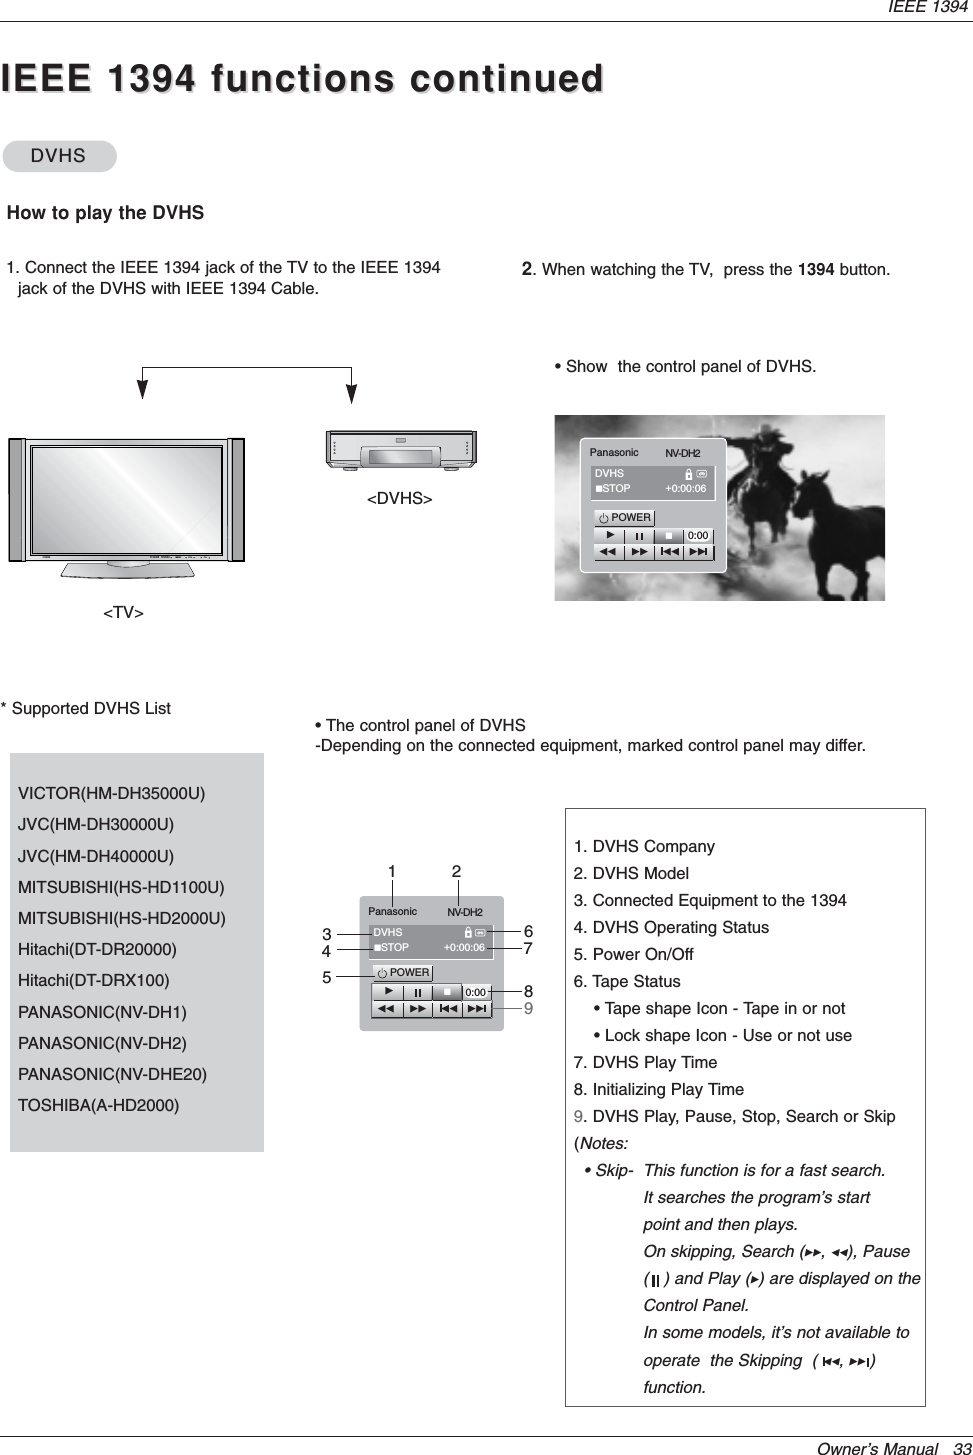 Owner’s Manual   33IEEE 1394IEEE 1394 functions continuedIEEE 1394 functions continuedDVHSDVHSVHow to play the DVHSTV/VIDEOMENUVOL CH POWERTV GUIDE&lt;TV&gt;&lt;DVHS&gt;1. Connect the IEEE 1394 jack of the TV to the IEEE 1394jack of the DVHS with IEEE 1394 Cable.2. When watching the TV,  press the 1394 button.• Show  the control panel of DVHS.POWERGVGGFF FF GGPanasonic NV-DH2DVHSVSTOP +0:00:06* Supported DVHS ListVICTOR(HM-DH35000U) JVC(HM-DH30000U)JVC(HM-DH40000U)MITSUBISHI(HS-HD1100U) MITSUBISHI(HS-HD2000U)Hitachi(DT-DR20000) Hitachi(DT-DRX100) PANASONIC(NV-DH1) PANASONIC(NV-DH2) PANASONIC(NV-DHE20) TOSHIBA(A-HD2000)• The control panel of DVHS-Depending on the connected equipment, marked control panel may differ.0:00POWERGVGGFF FF GGPanasonic NV-DH2DVHSVSTOP +0:00:061 267893450:001. DVHS Company2. DVHS Model3. Connected Equipment to the 13944. DVHS Operating Status5. Power On/Off6. Tape Status• Tape shape Icon - Tape in or not • Lock shape Icon - Use or not use7. DVHS Play Time8. Initializing Play Time9. DVHS Play, Pause, Stop, Search or Skip(Notes:• Skip-  This function is for a fast search.It searches the program’s start point and then plays.On skipping, Search (GG,FF), Pause (   ) and Play (G) are displayed on theControl Panel.In some models, it’s not available to operate  the Skipping  ( FF,GG)function.